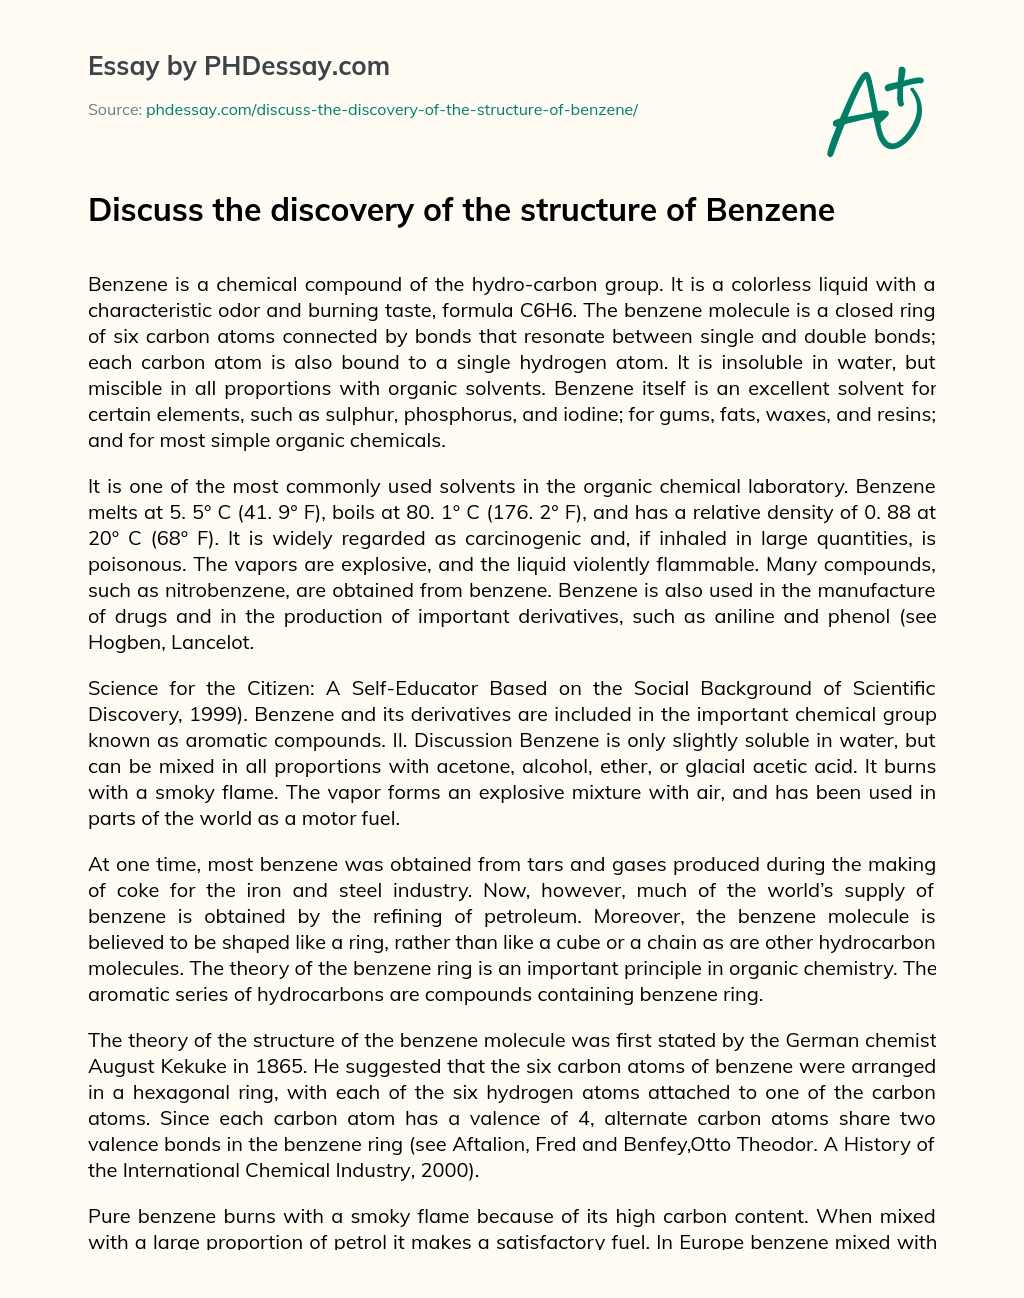 Discuss the discovery of the structure of Benzene essay